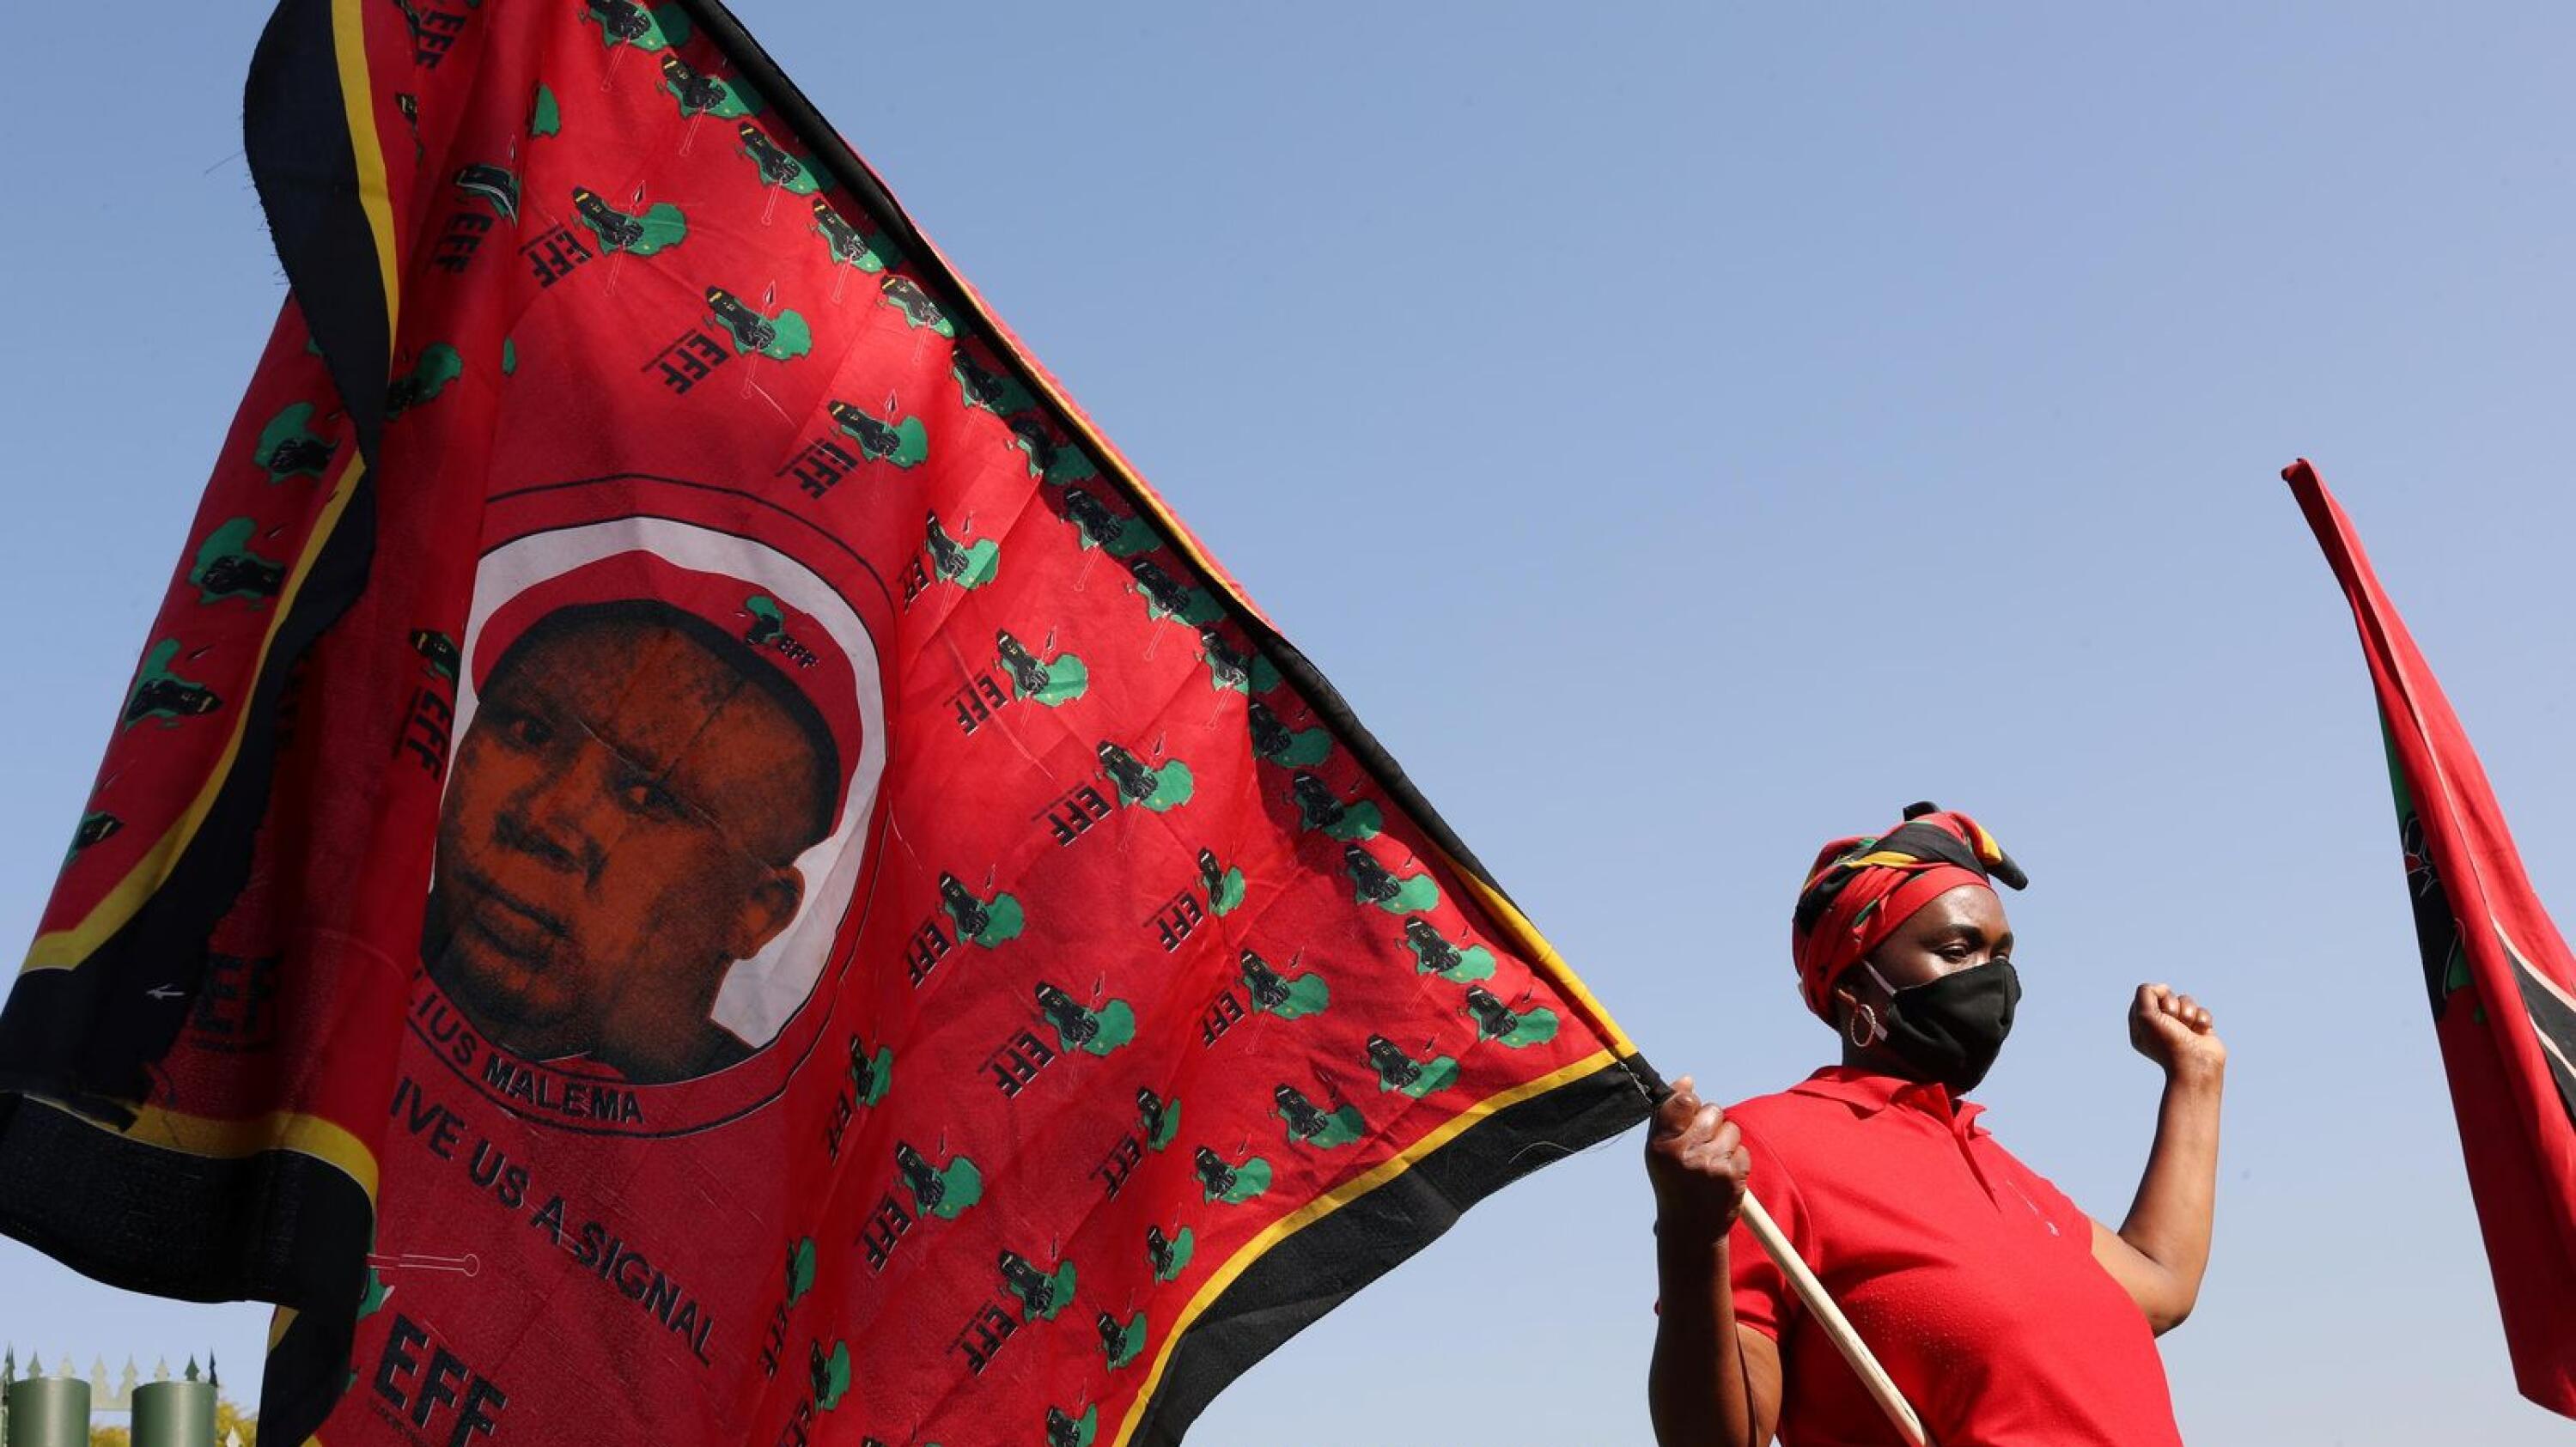 A member of South Africa's opposition party the Economic Freedom Fighters (EFF) holds a flag with an image of the party leader Julius Malema 